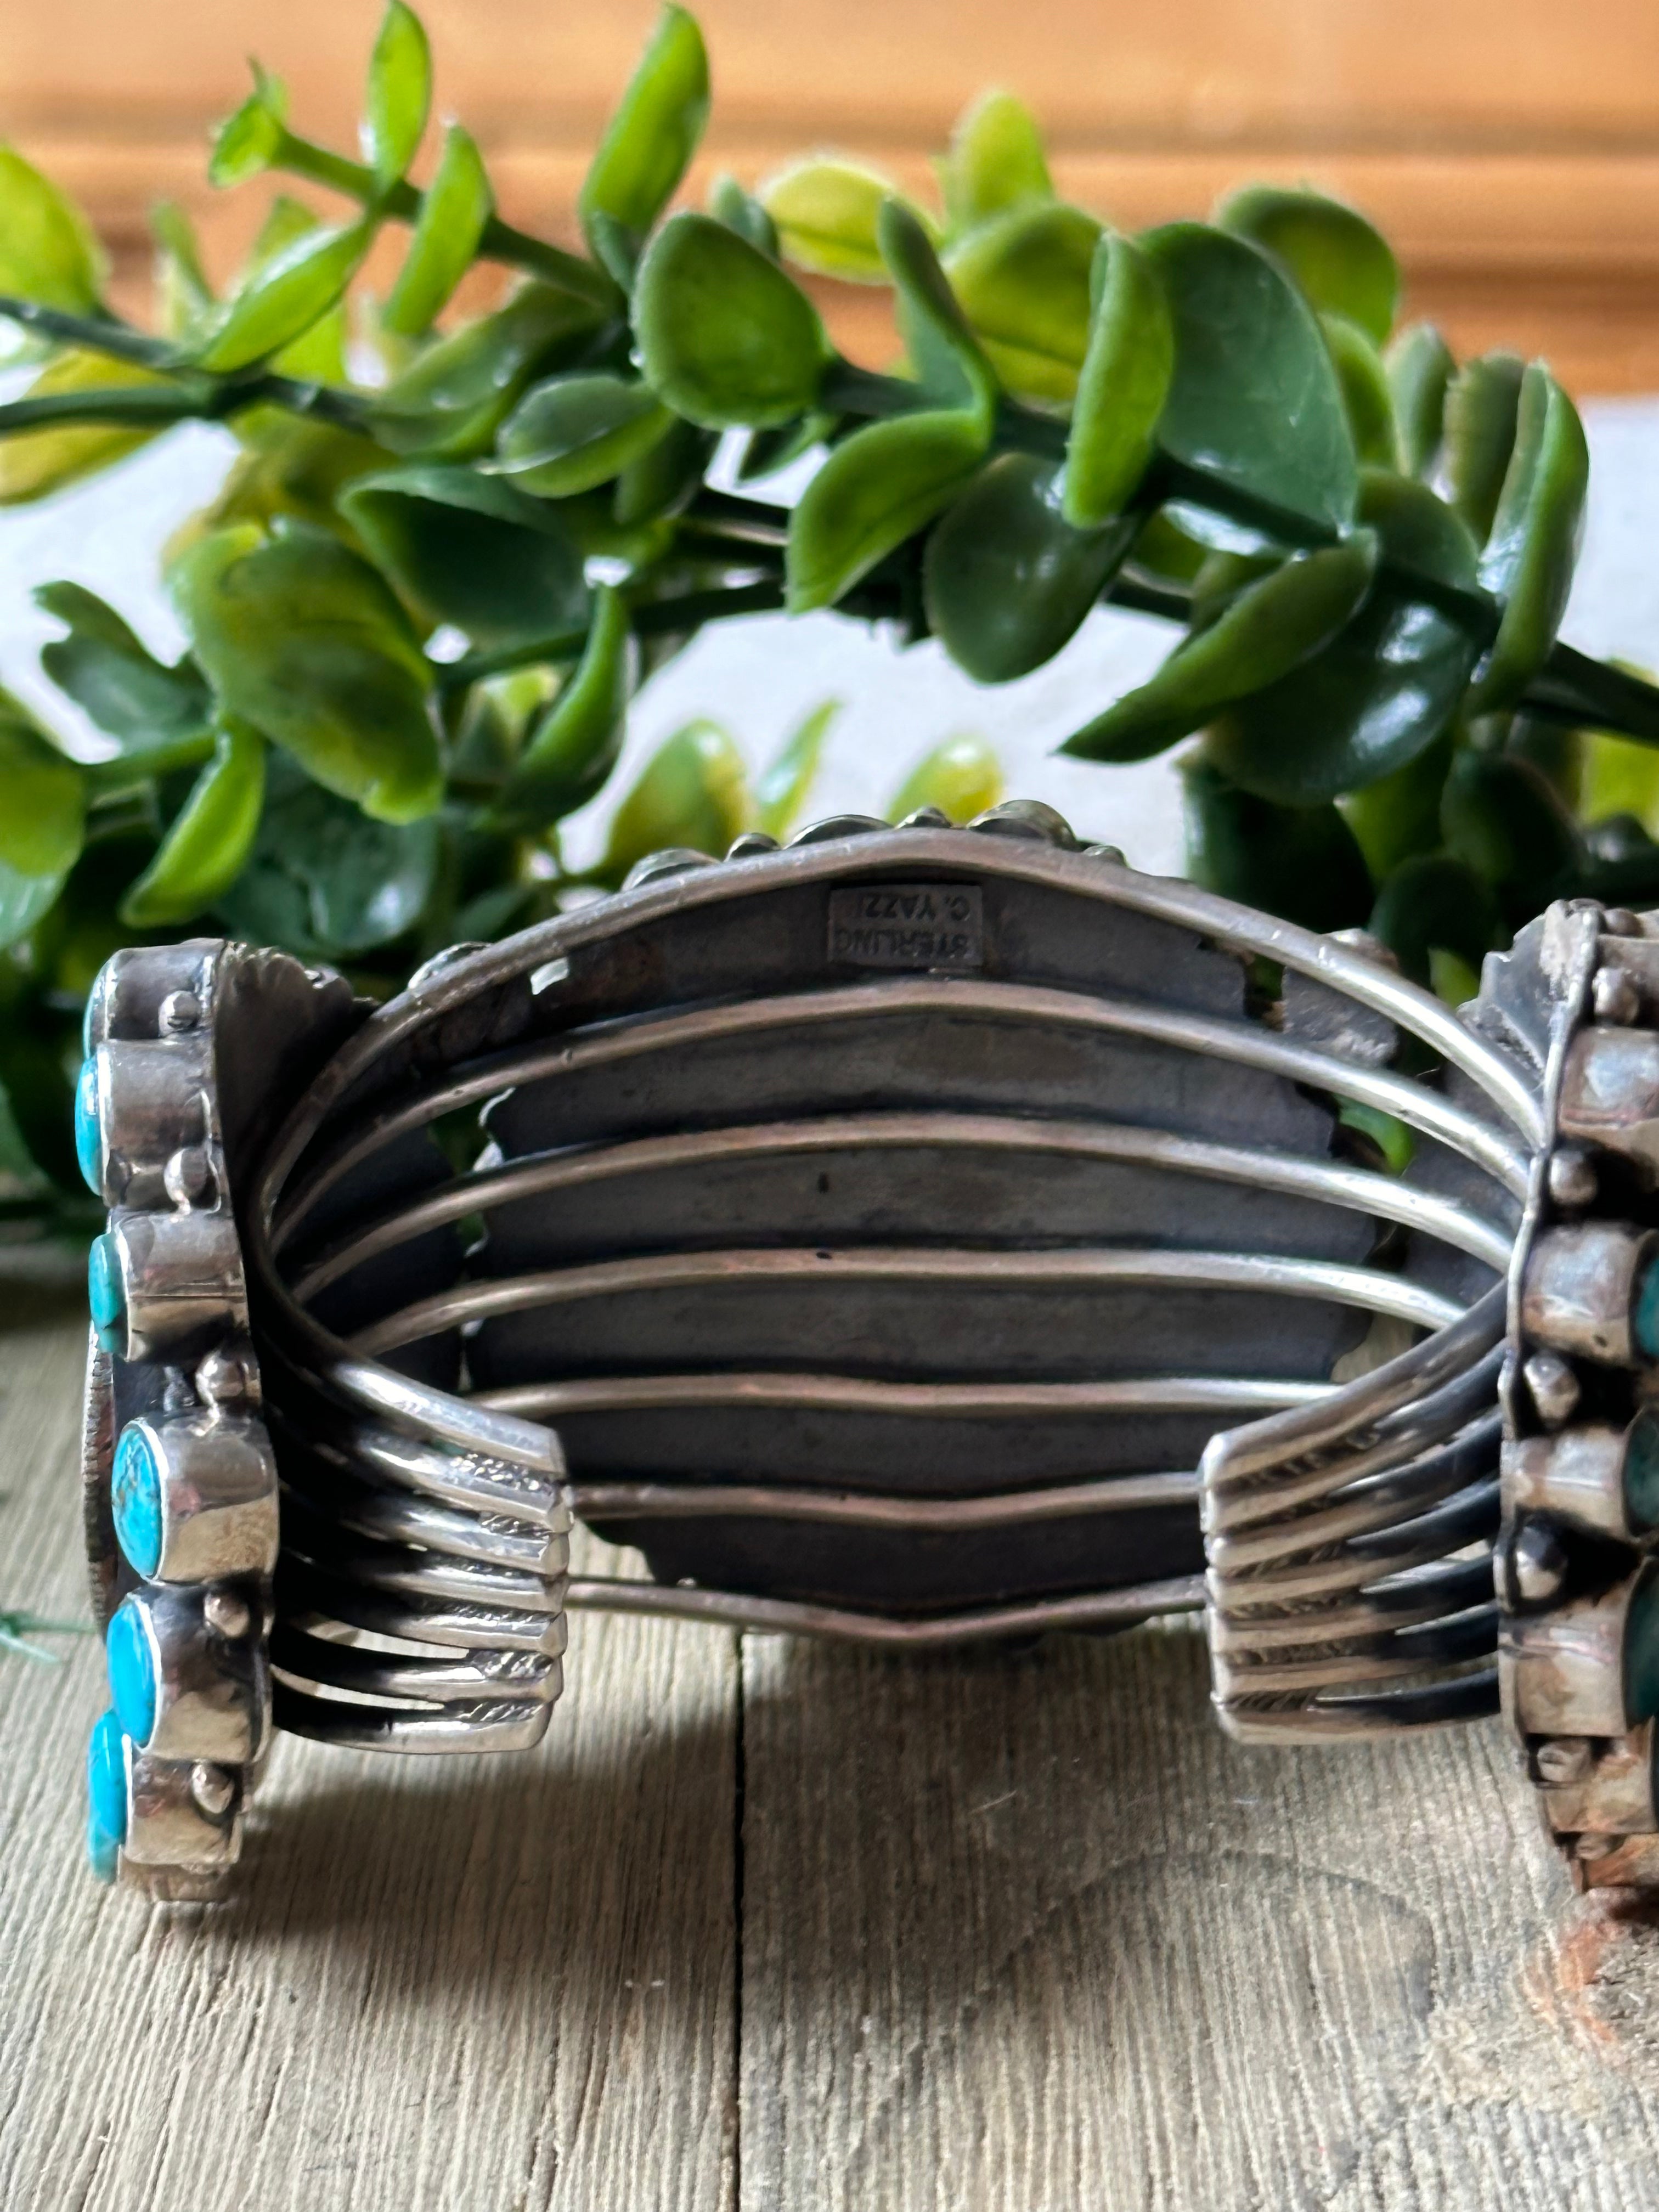 Navajo Made Kingman Turquoise & Sterling Silver Liberty Cuff Bracelet